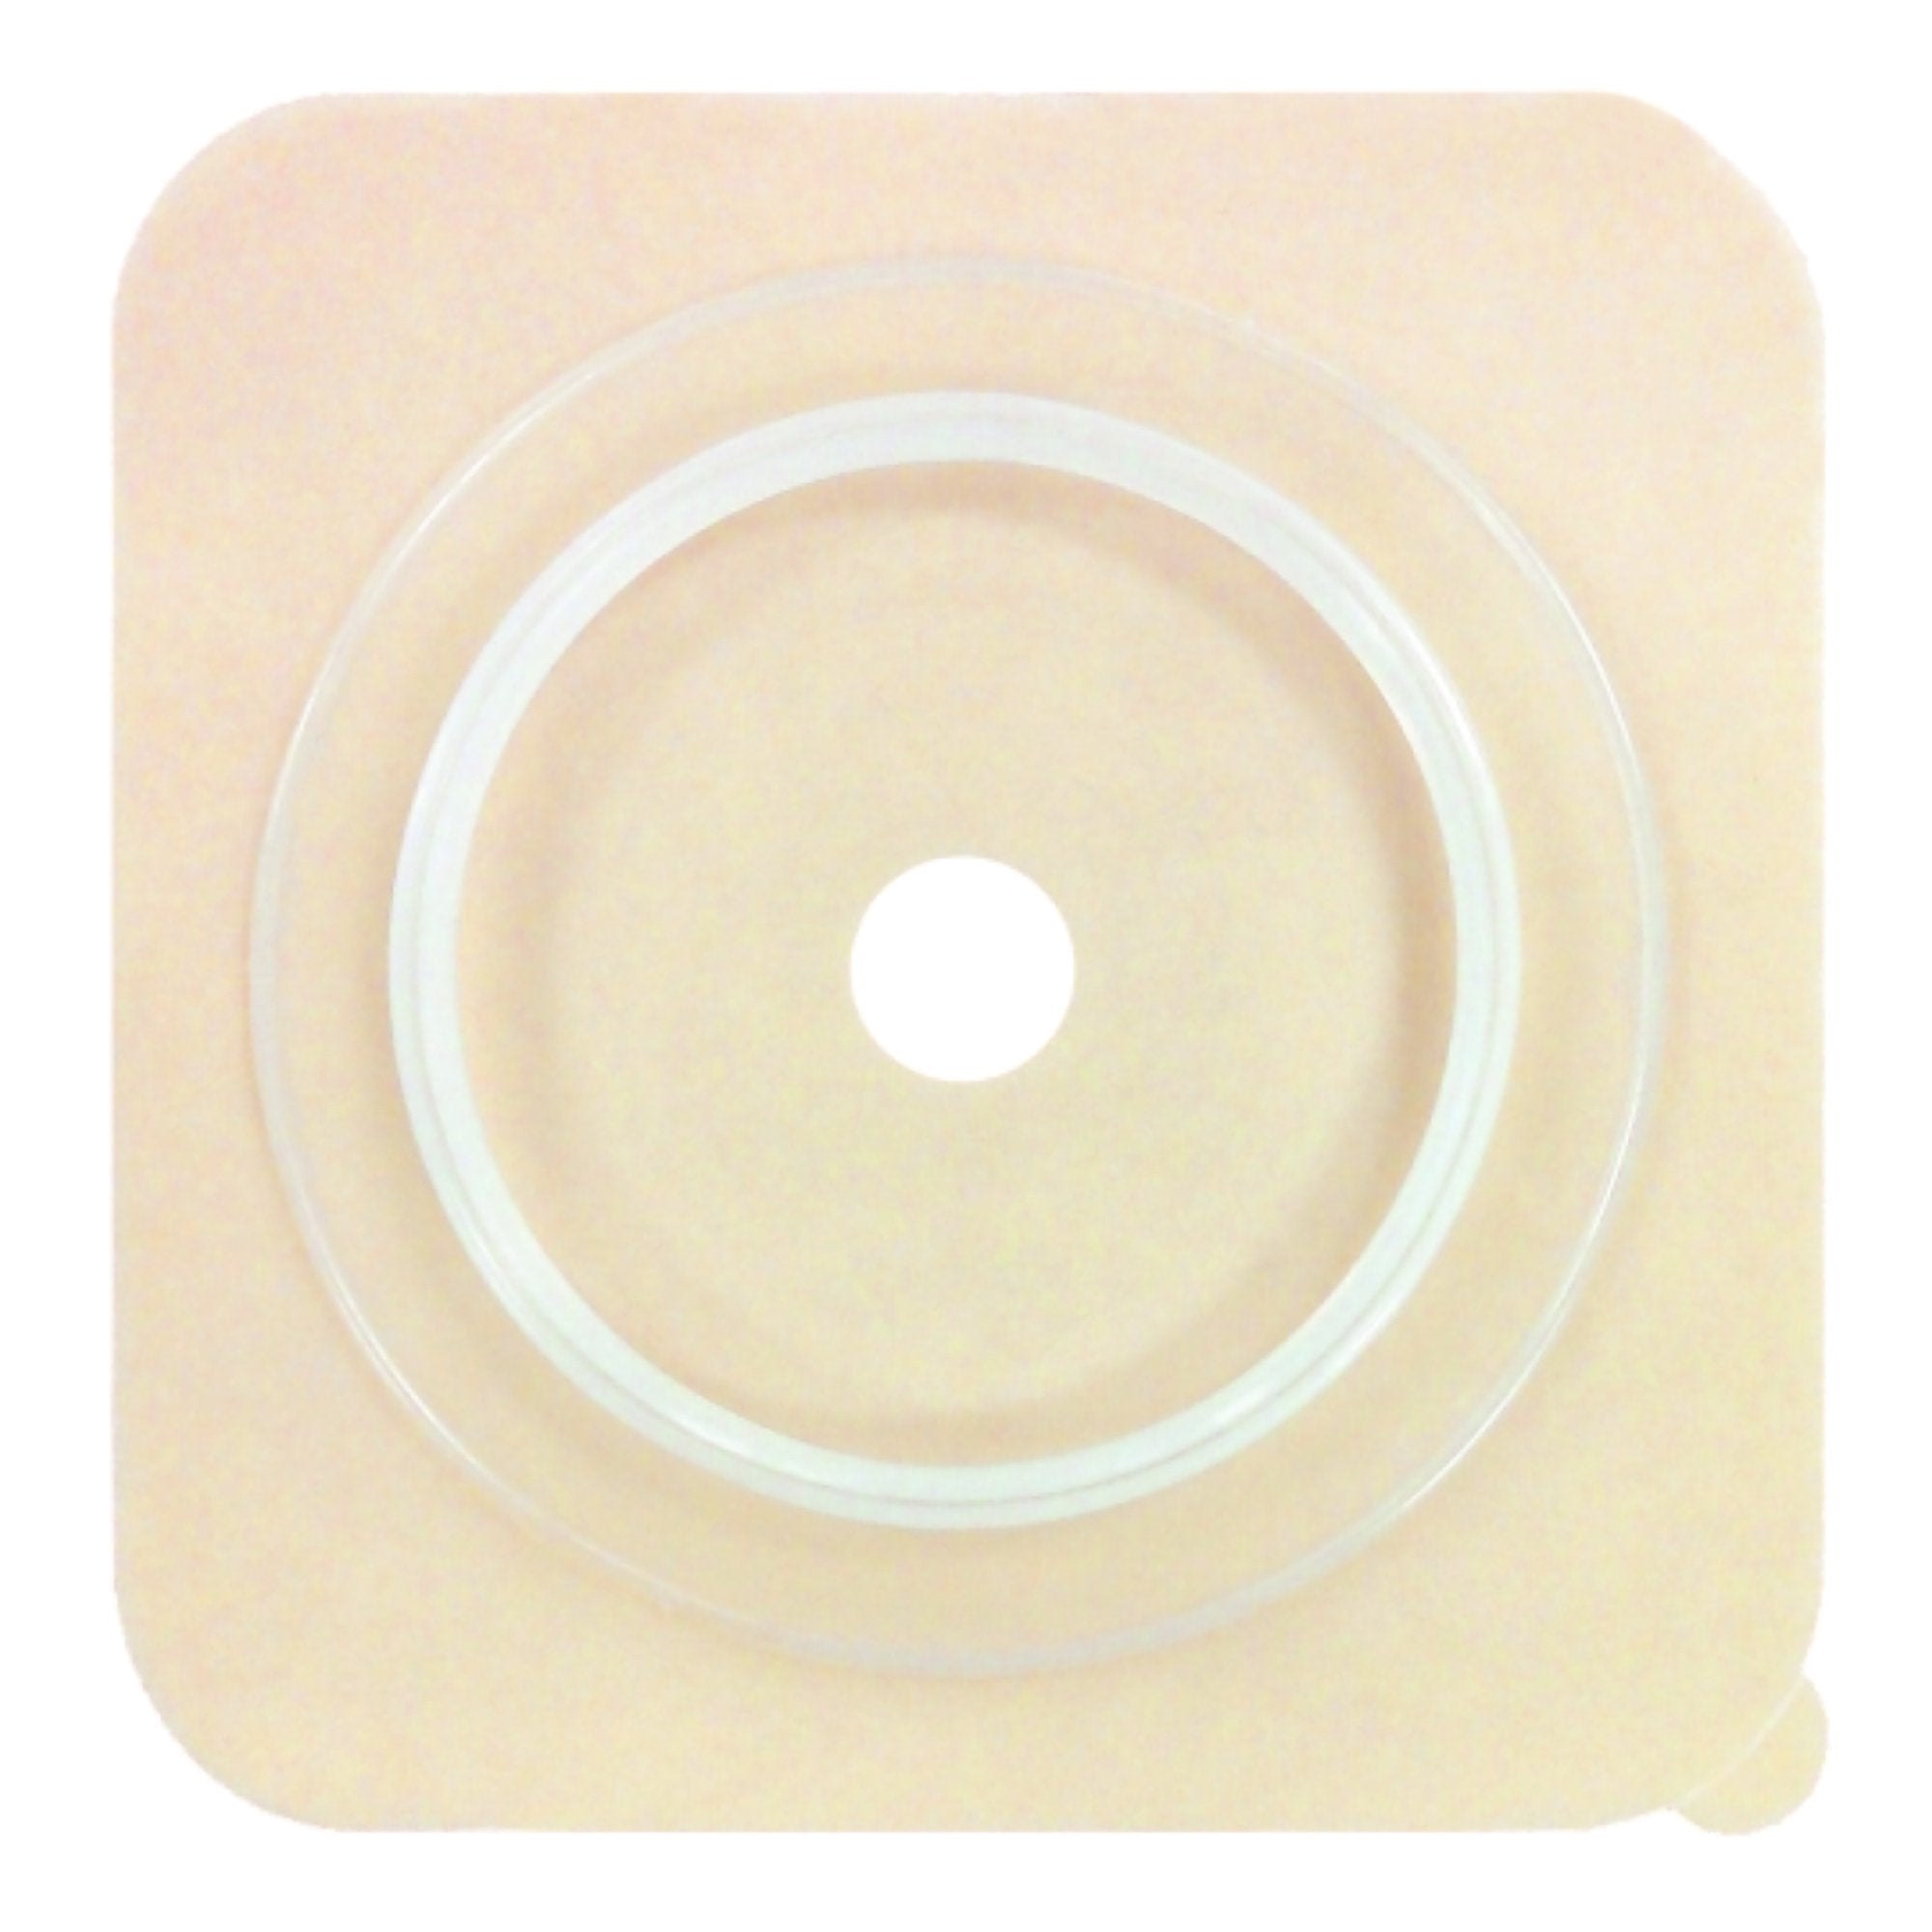 Ostomy Barrier Securi-T® Trim to Fit, Standard Wear 57 mm Flange Red Code System Hydrocolloid Up to 1-3/4 Inch Opening 4 X 4 Inch